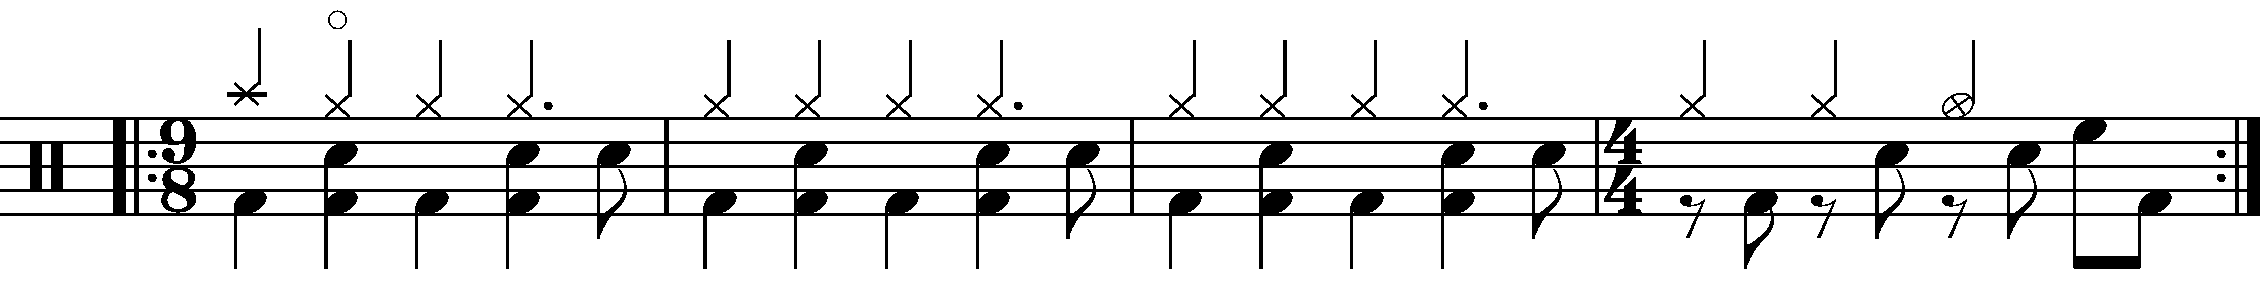 A four bar phrase using simple time 9/8 and 4/4